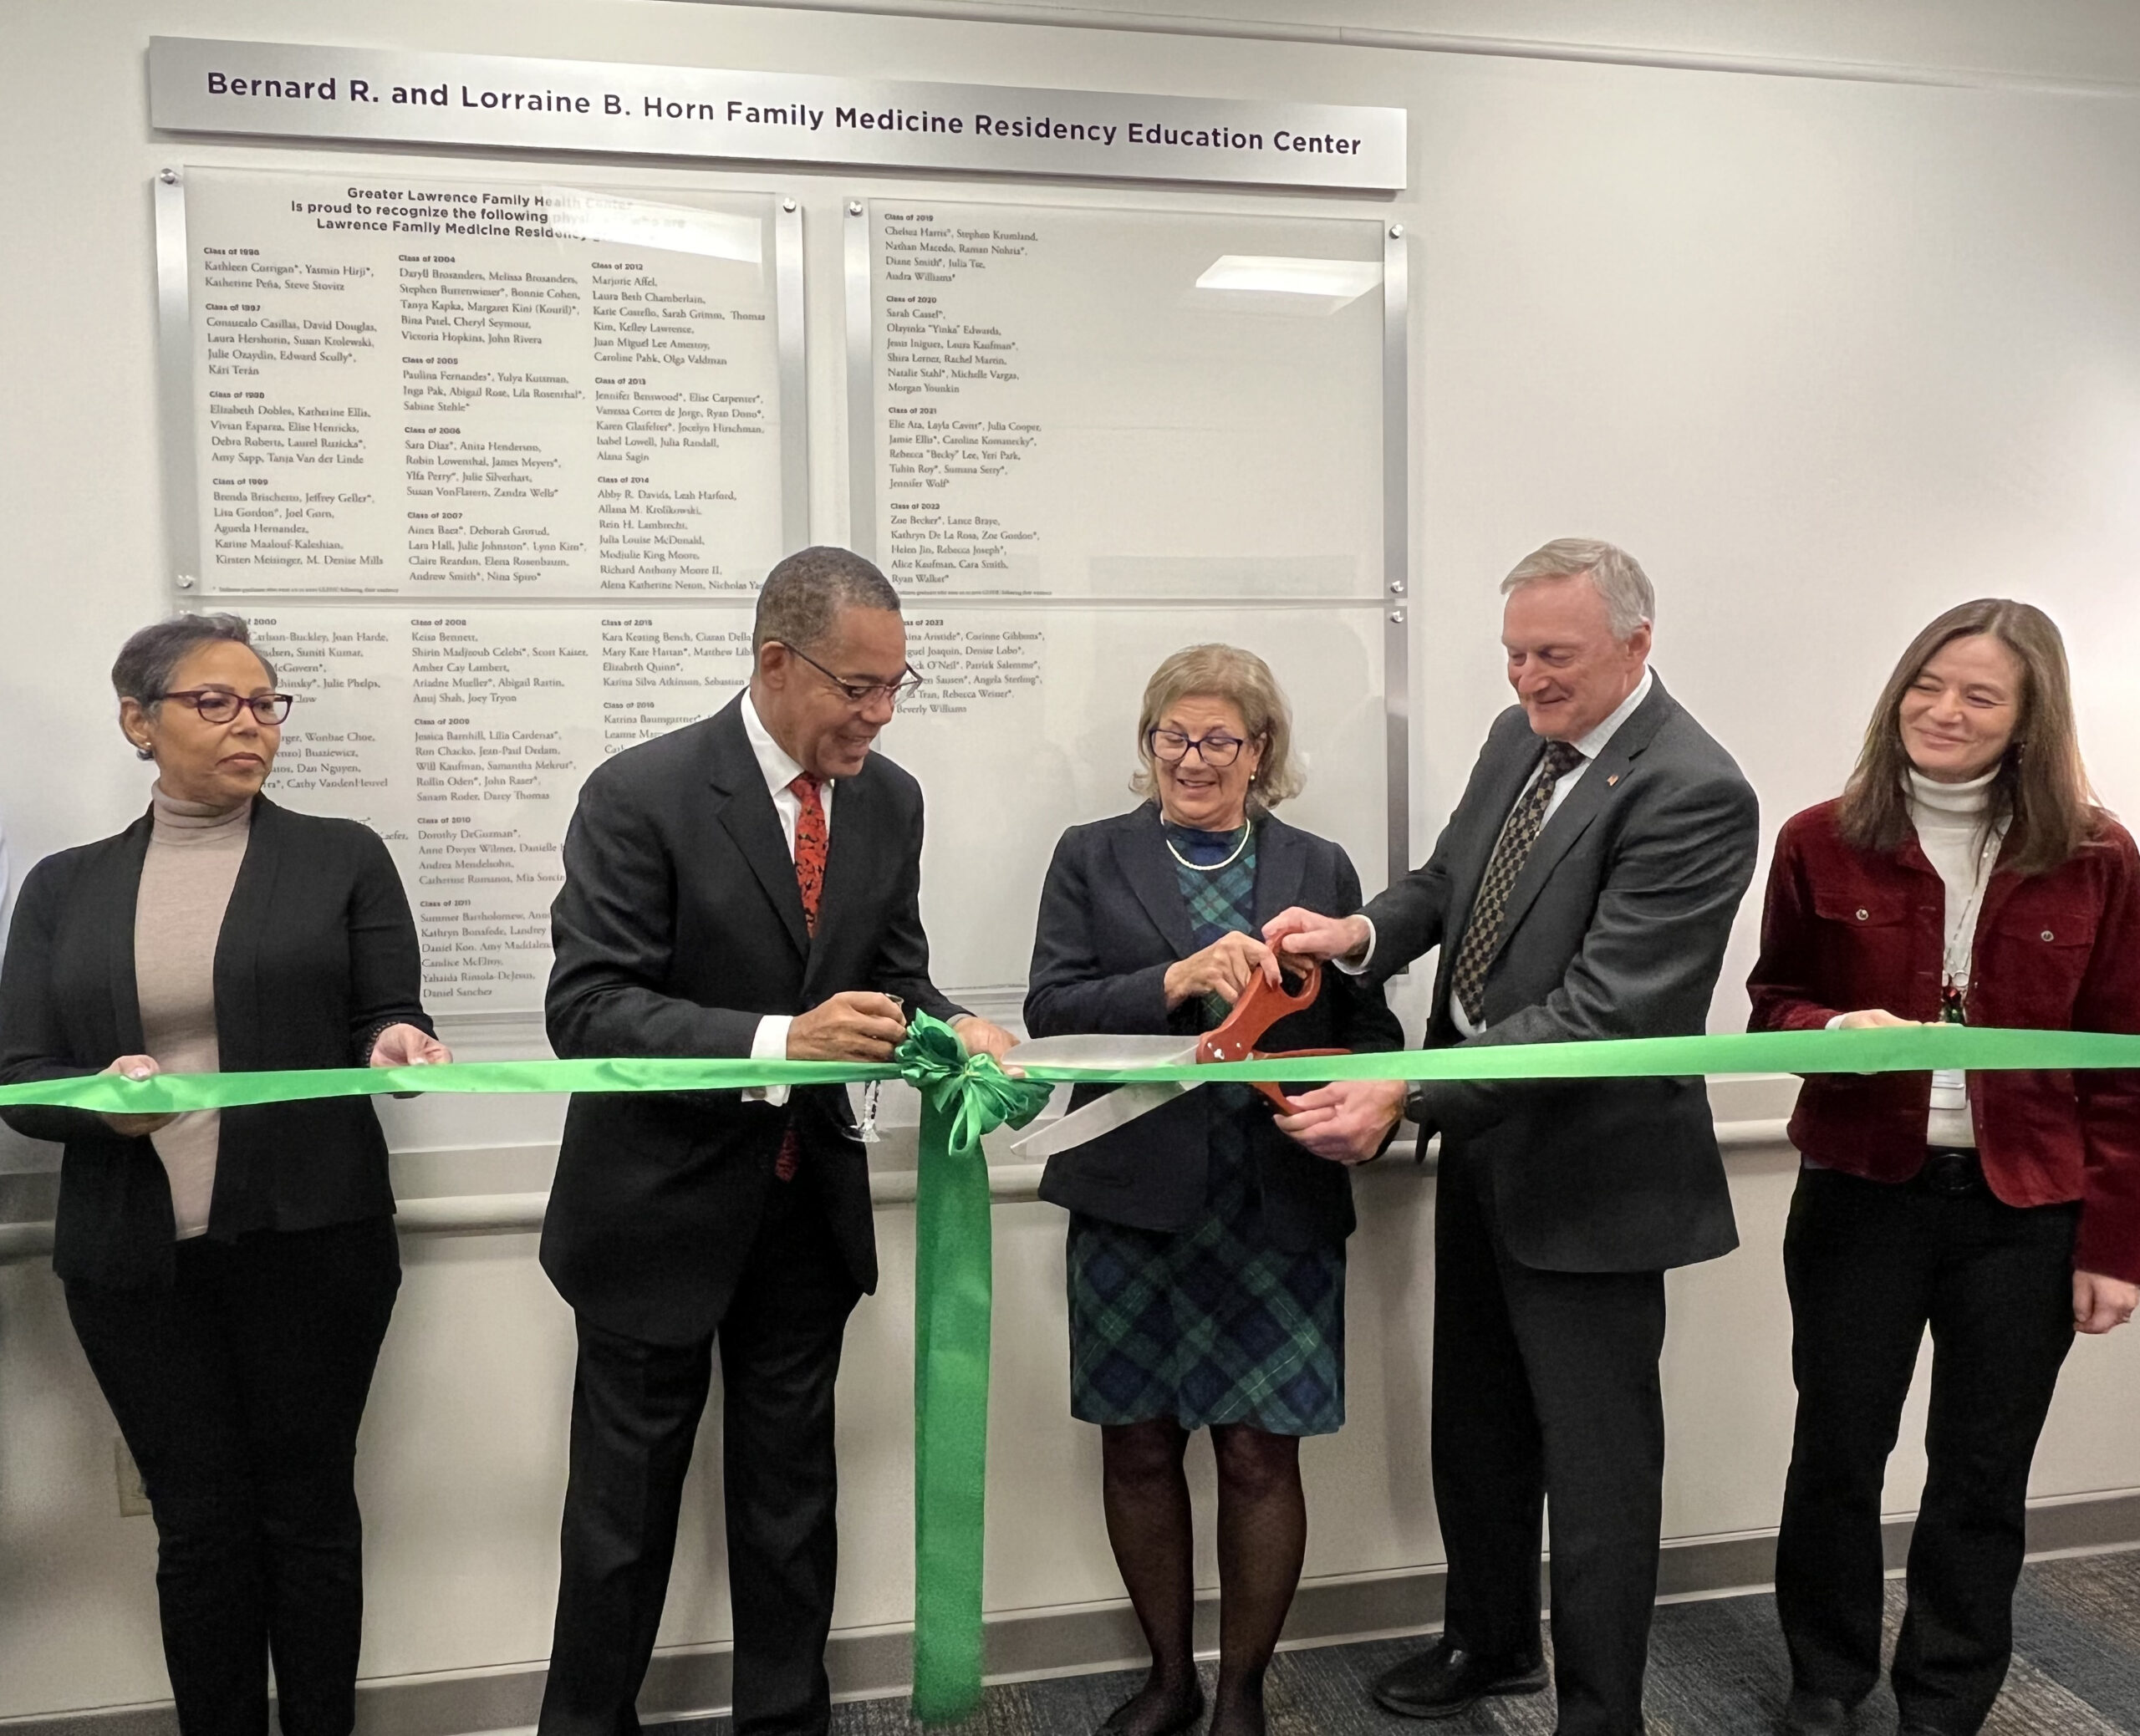 Cutting the ribbon at the dedication of GLFHC's Bernard R. and Lorraine B. Horn Family Medicine Residency Education Center.